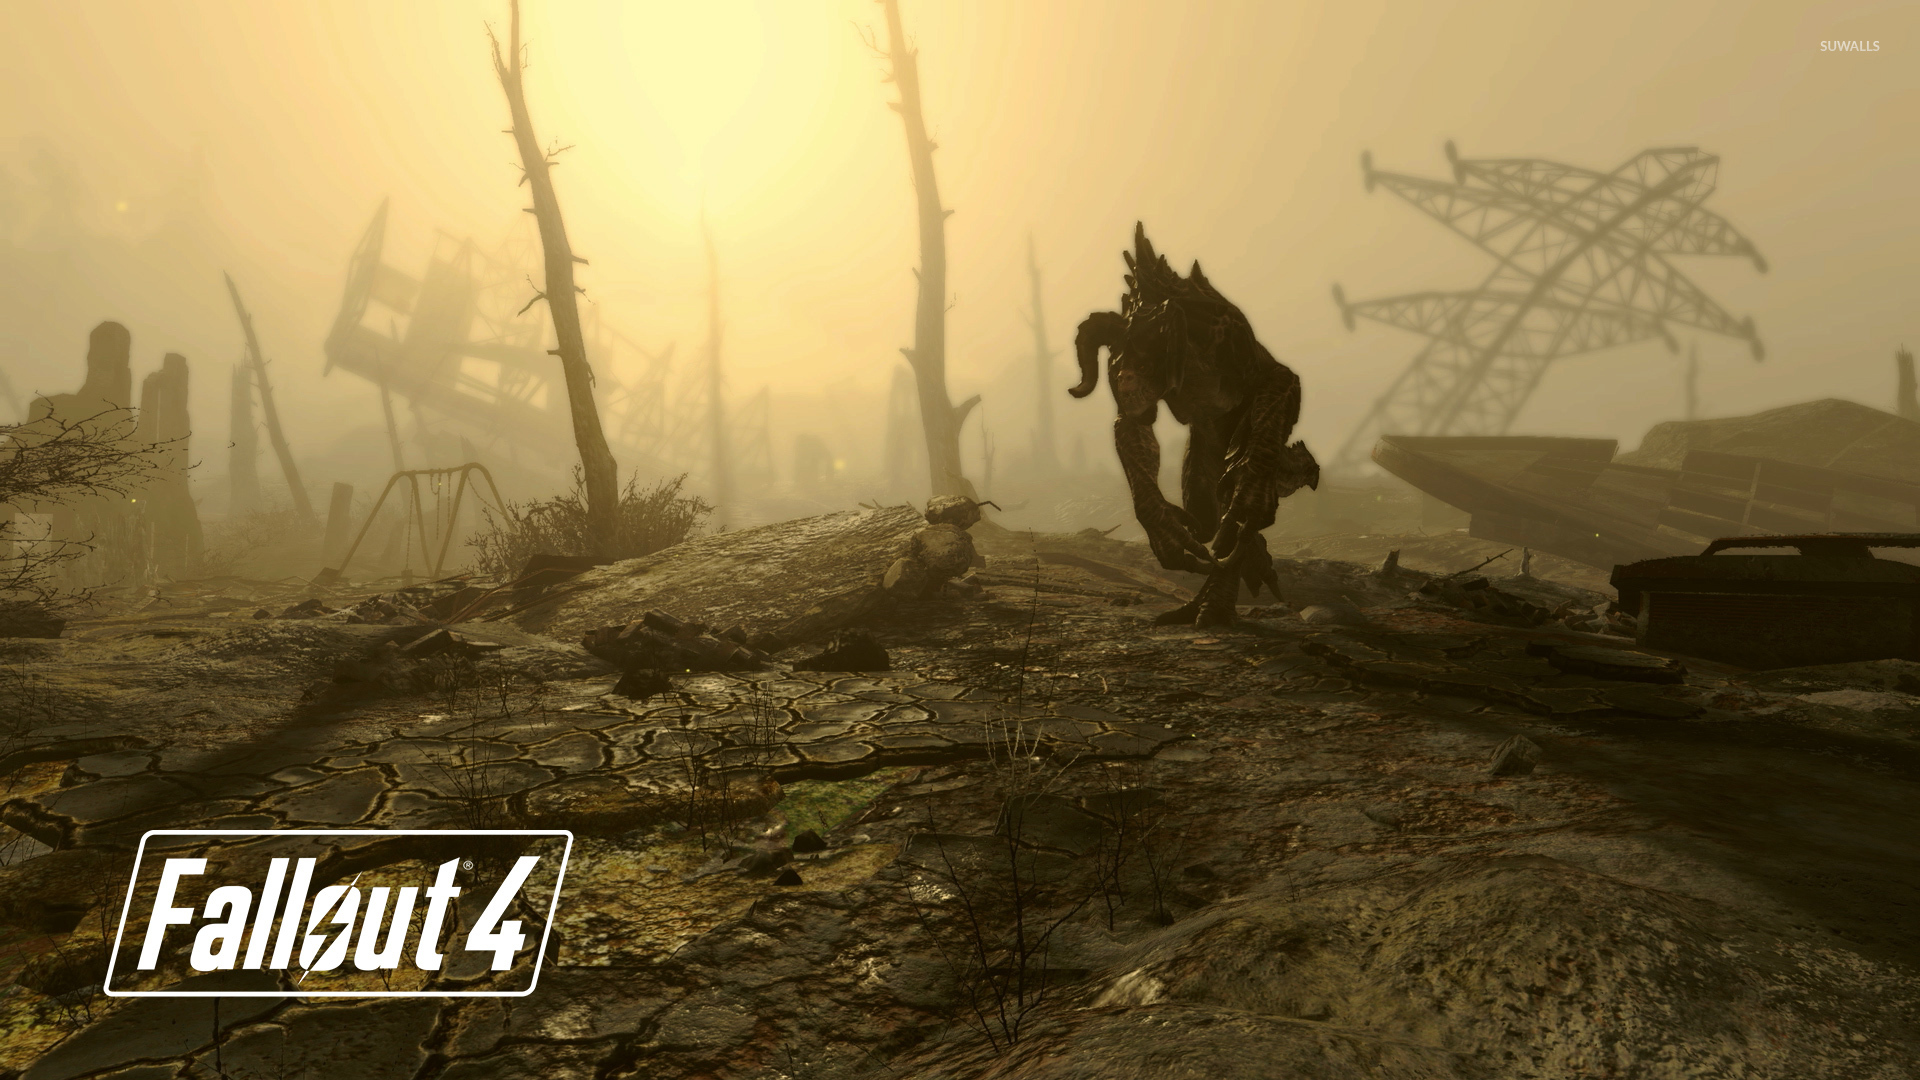 Fallout 4 Deathclaw Background - HD Wallpaper 